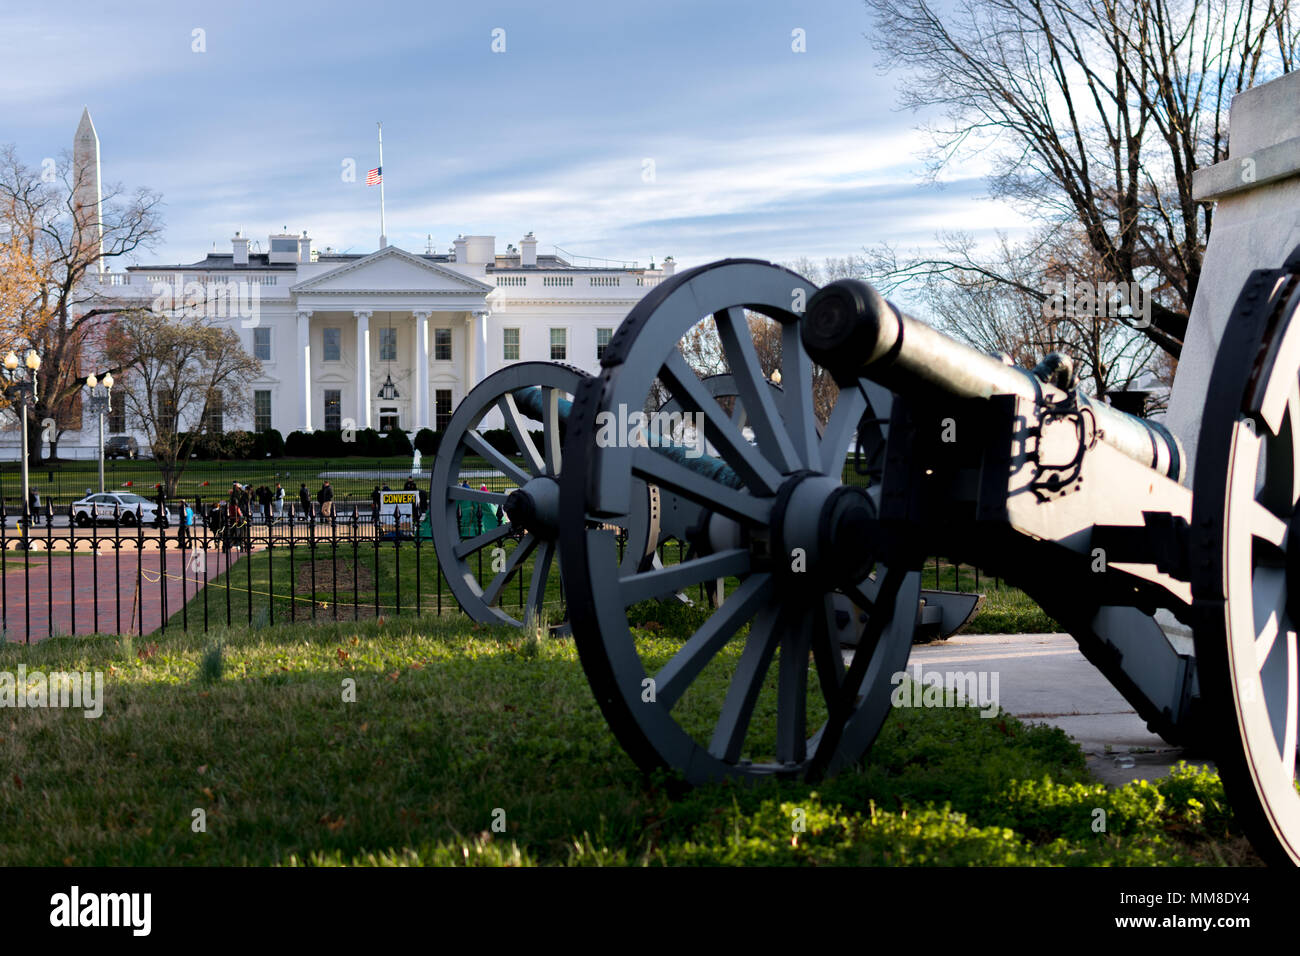 Cannon in Lafayette square in front of White House on windy blustery day, with American flag at half mast and Washington monument in background Stock Photo